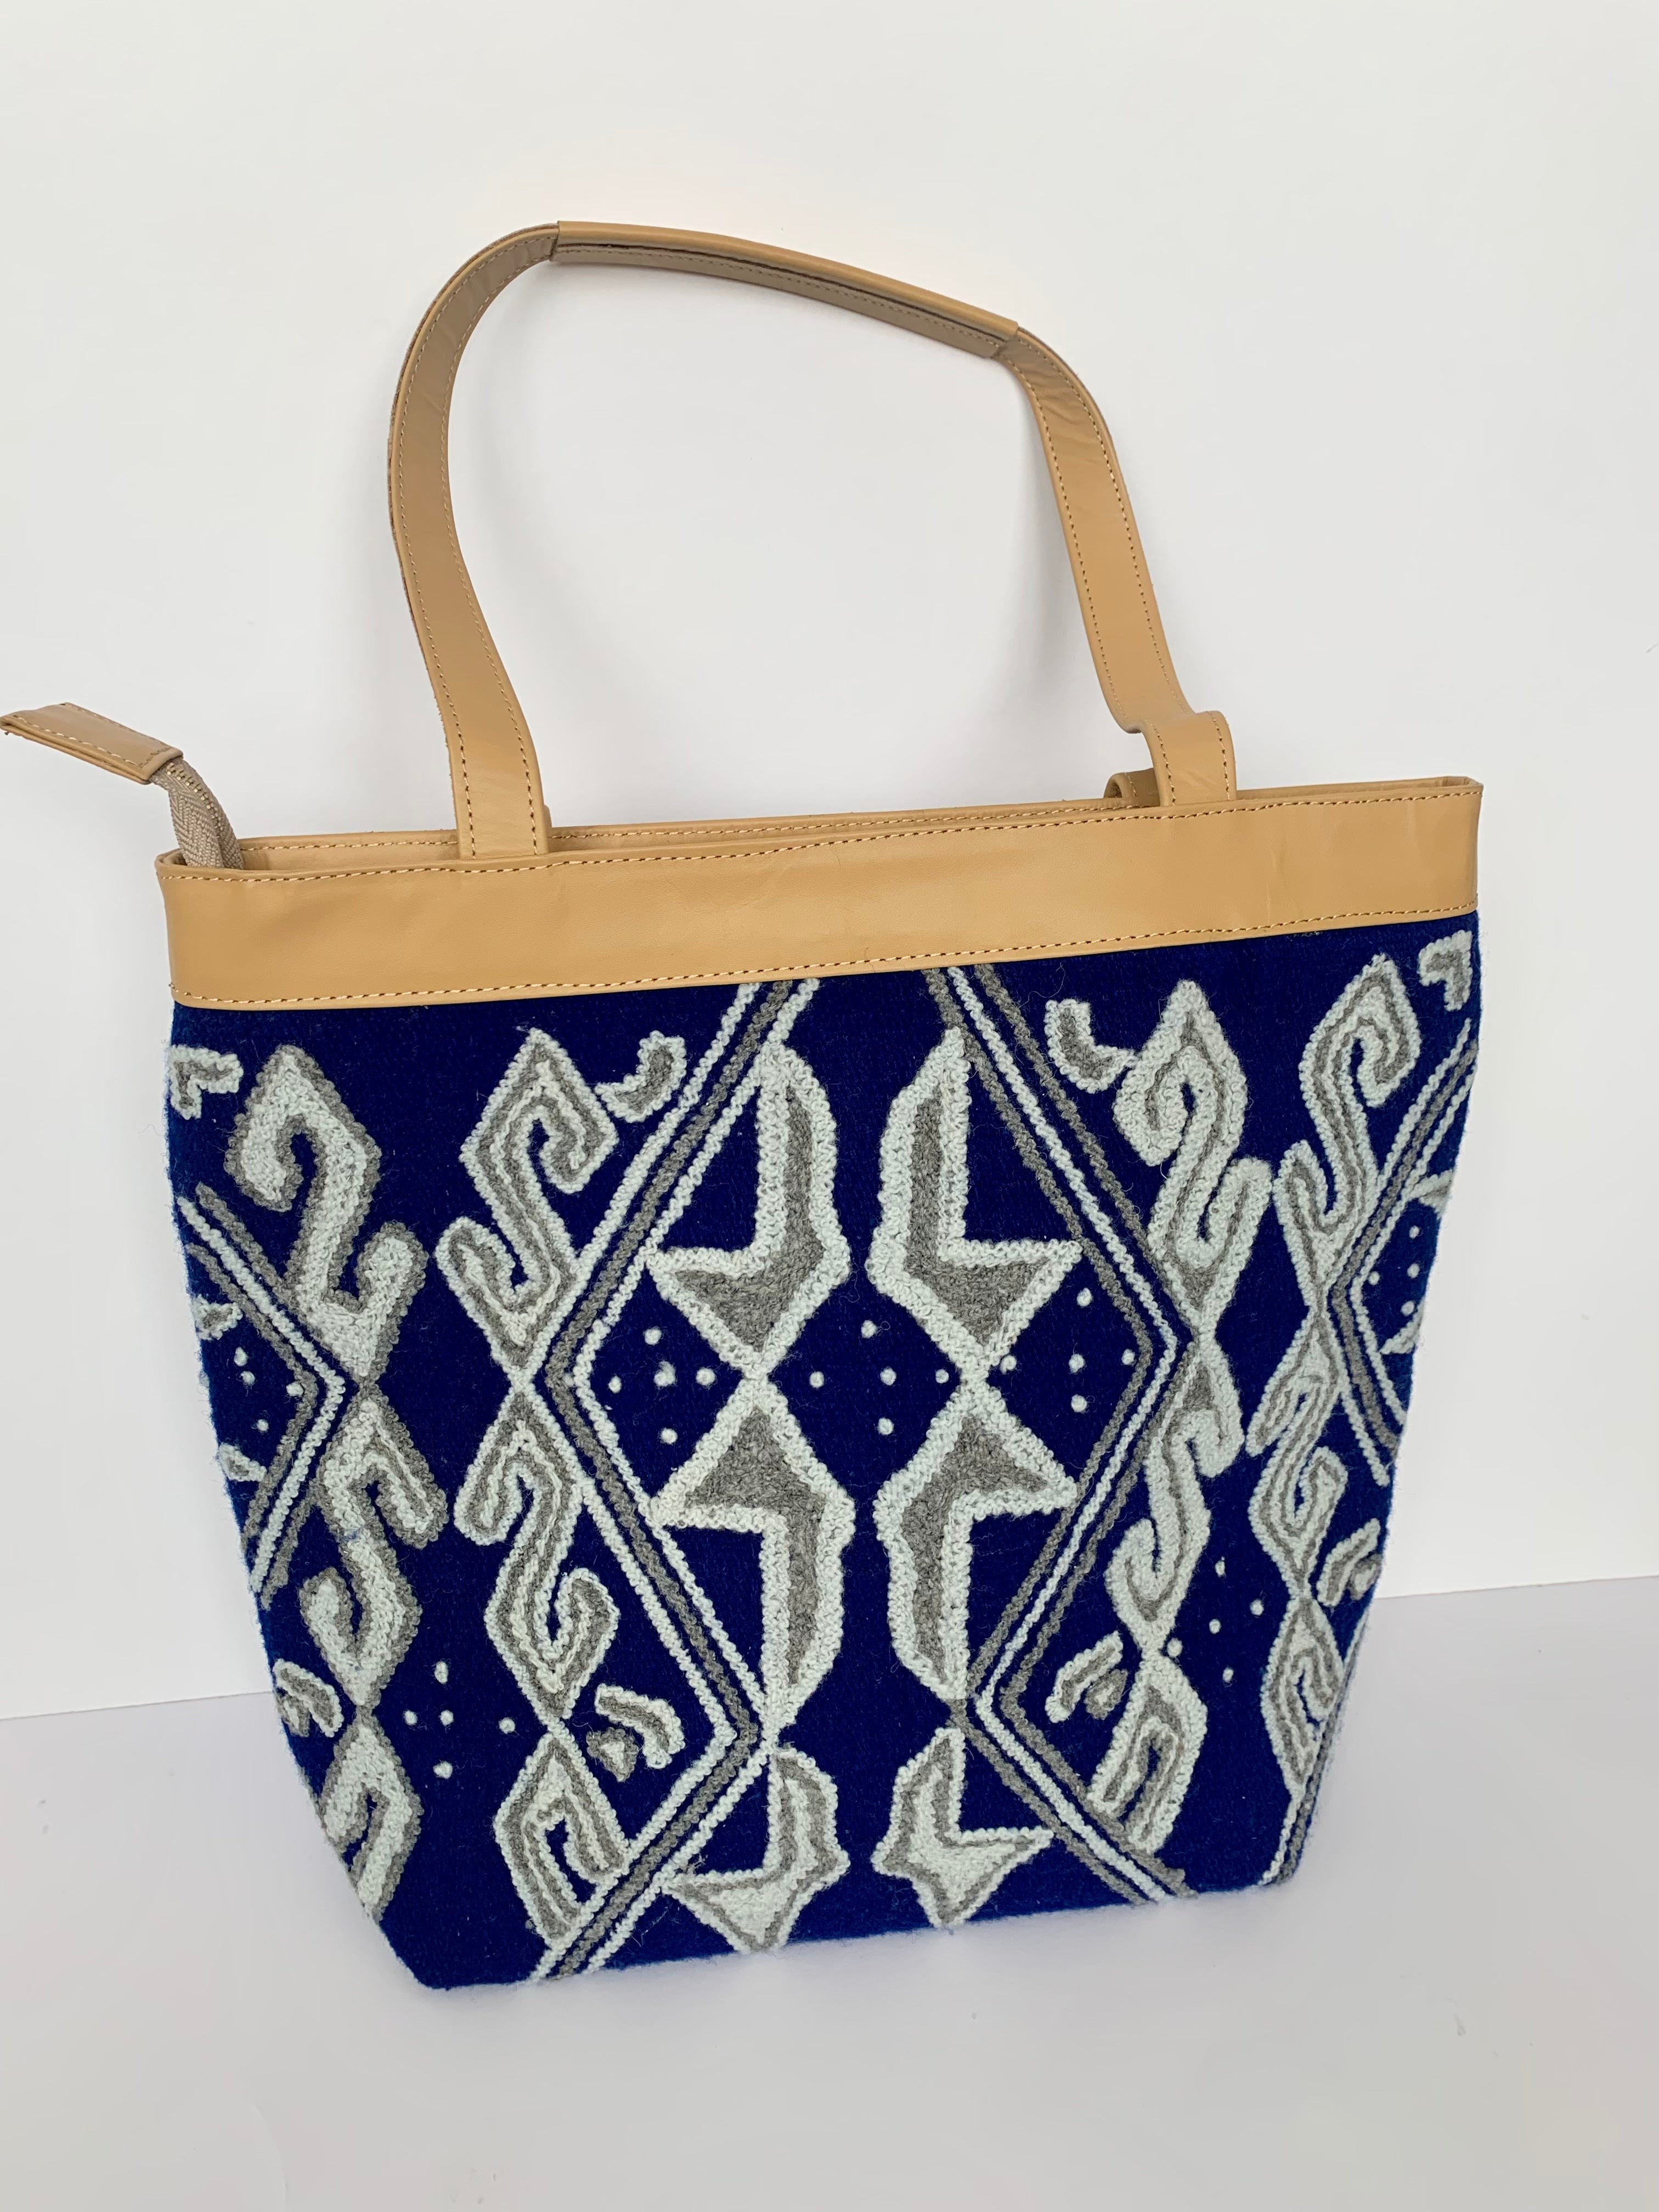 Navy and white embroidered tote bag with leather handles and zipper closure. 